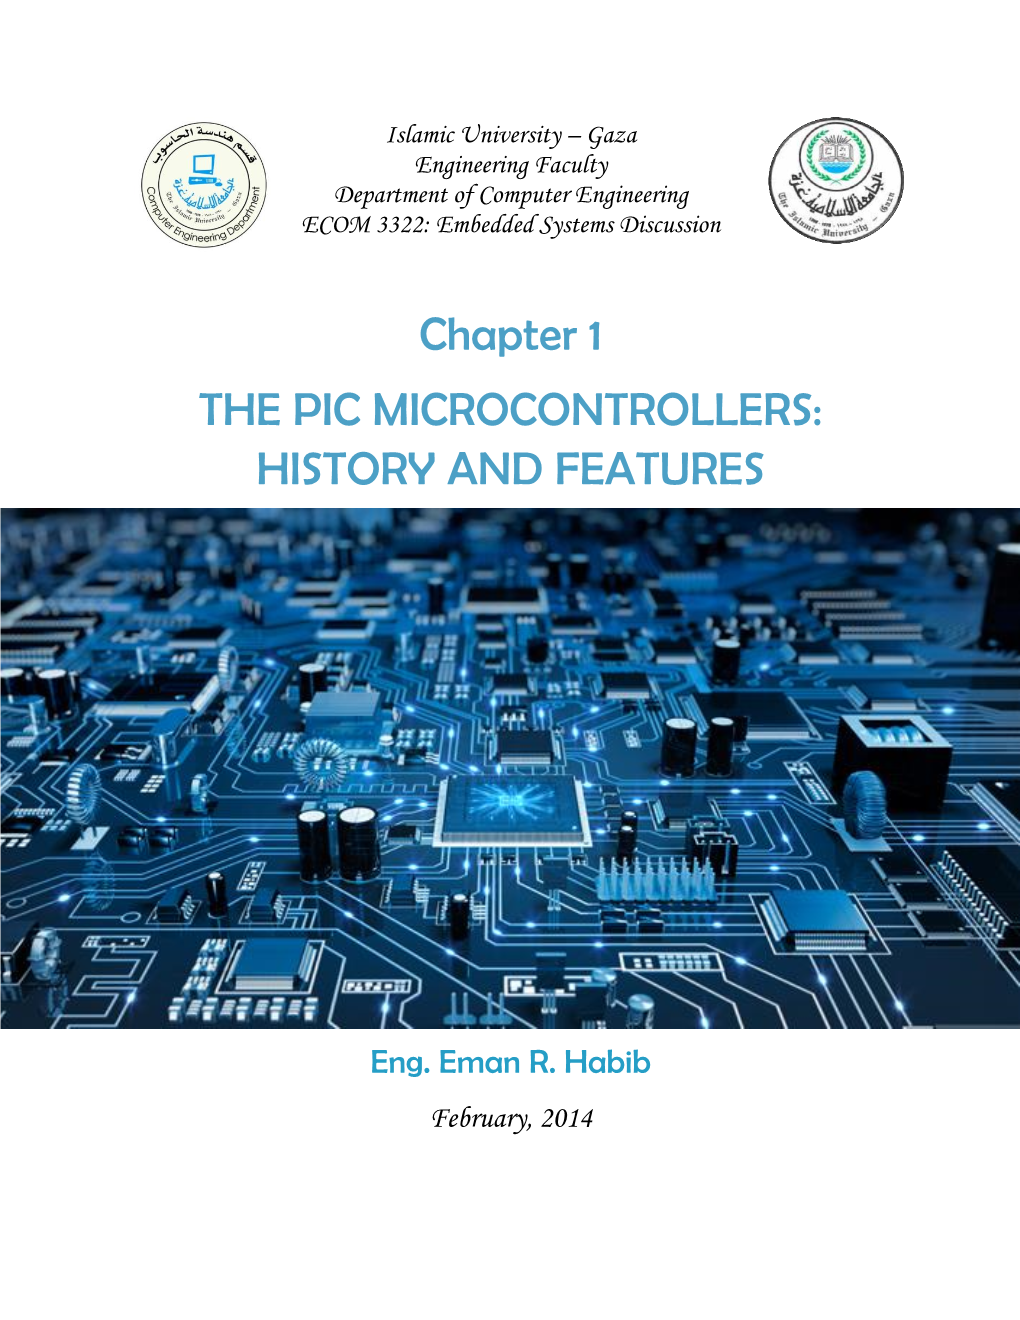 Chapter 1 the PIC MICROCONTROLLERS: HISTORY and FEATURES